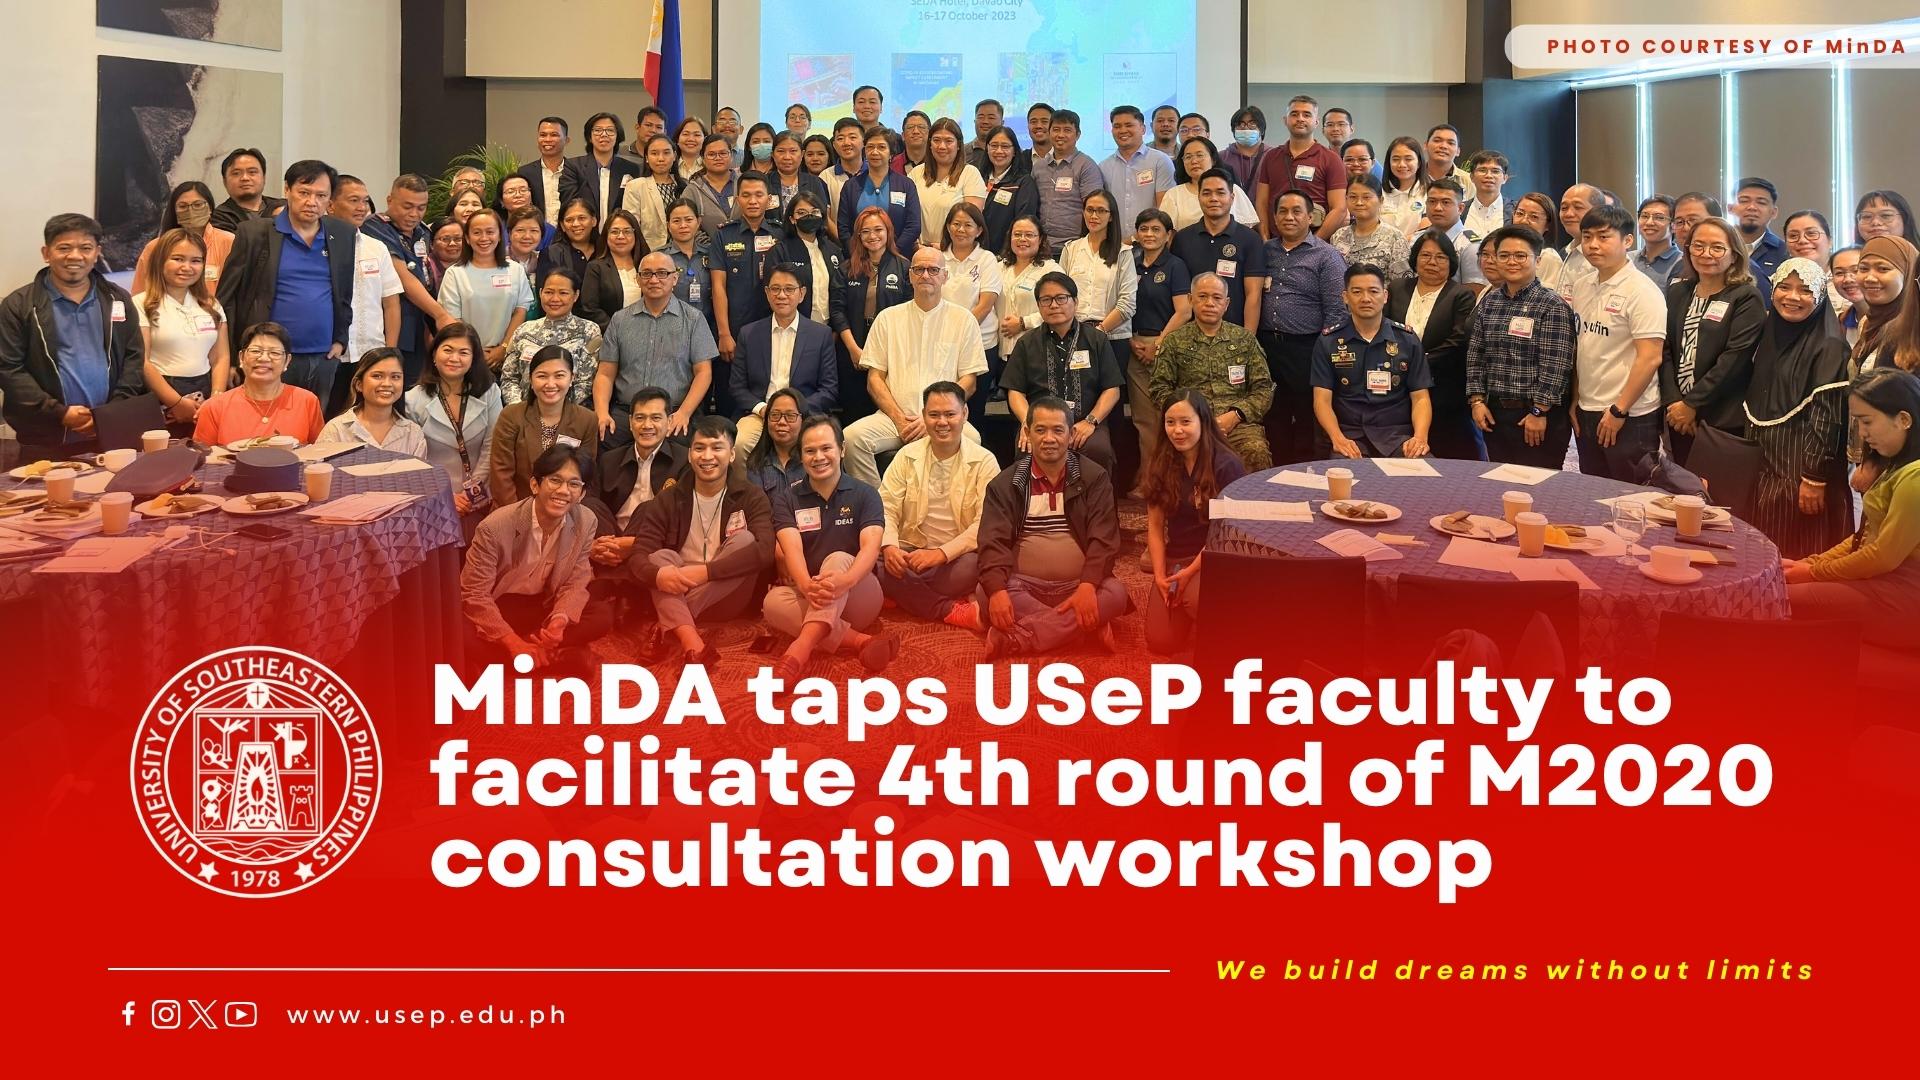 MinDA taps USeP faculty to facilitate 4th round of M2020 consultation workshop